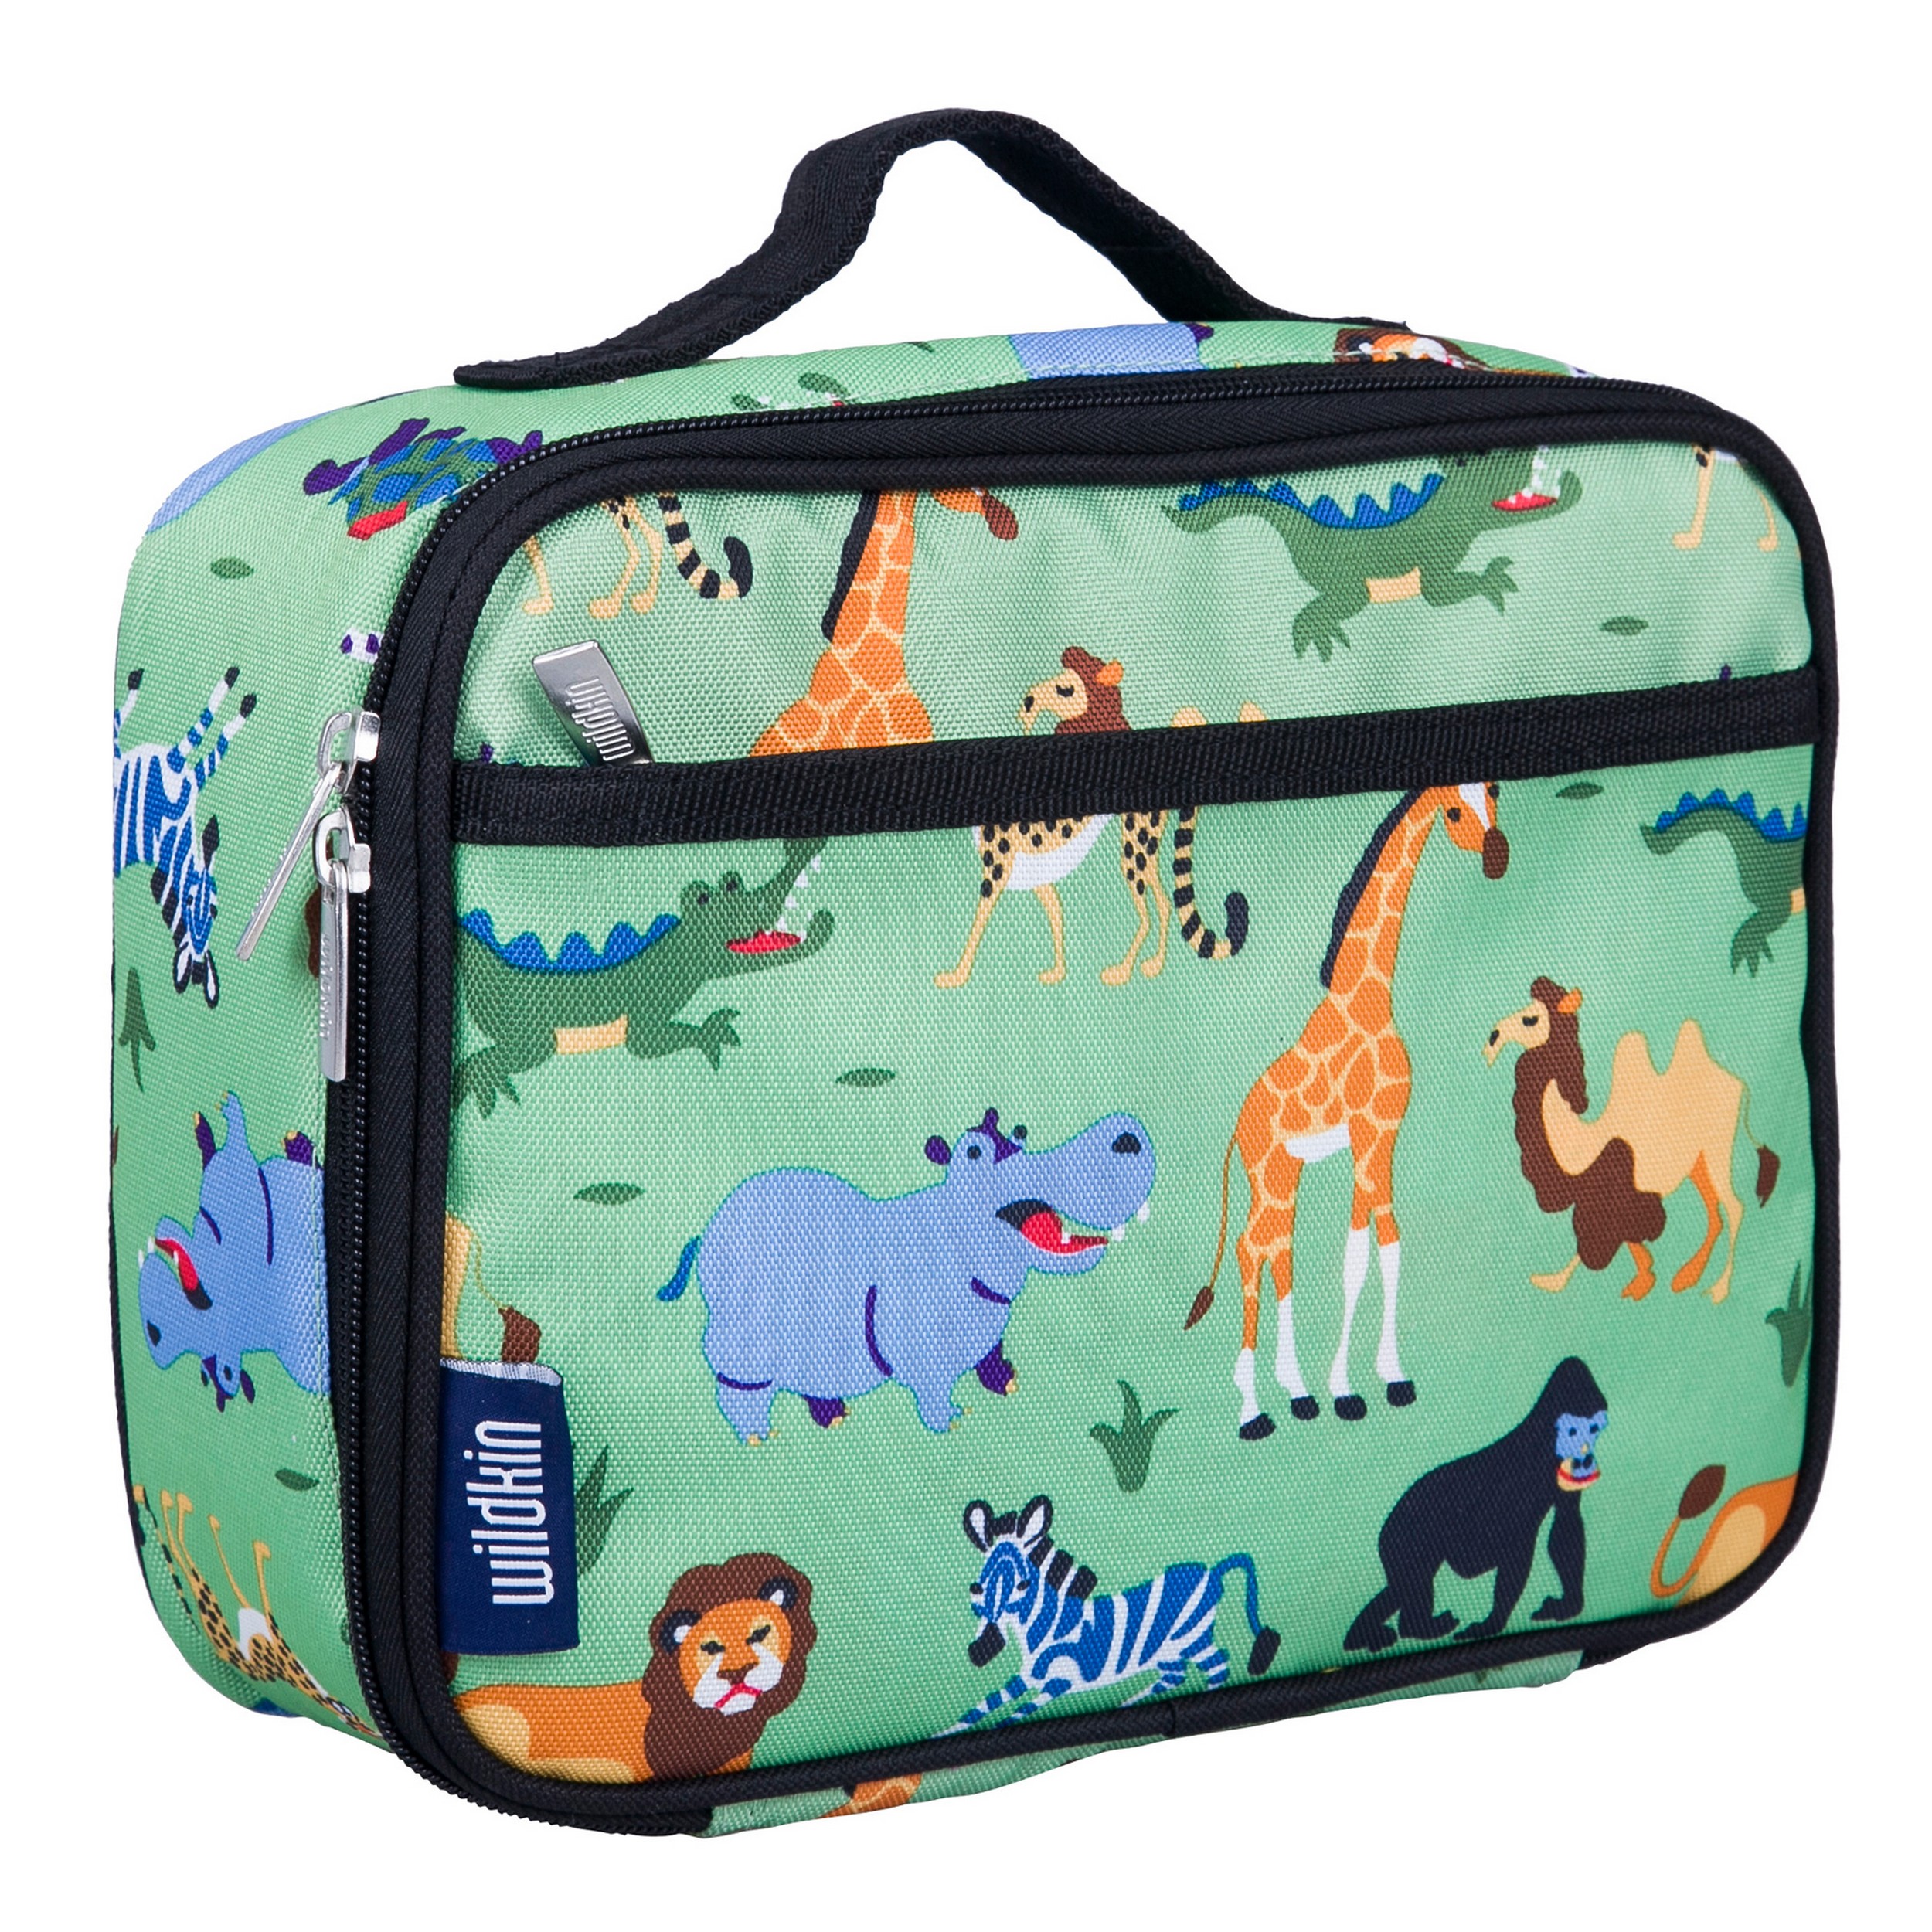 Wildkin Kids Insulated Lunch Box for Boy and Girls, BPA Free (Wild Animals Green) - image 1 of 8